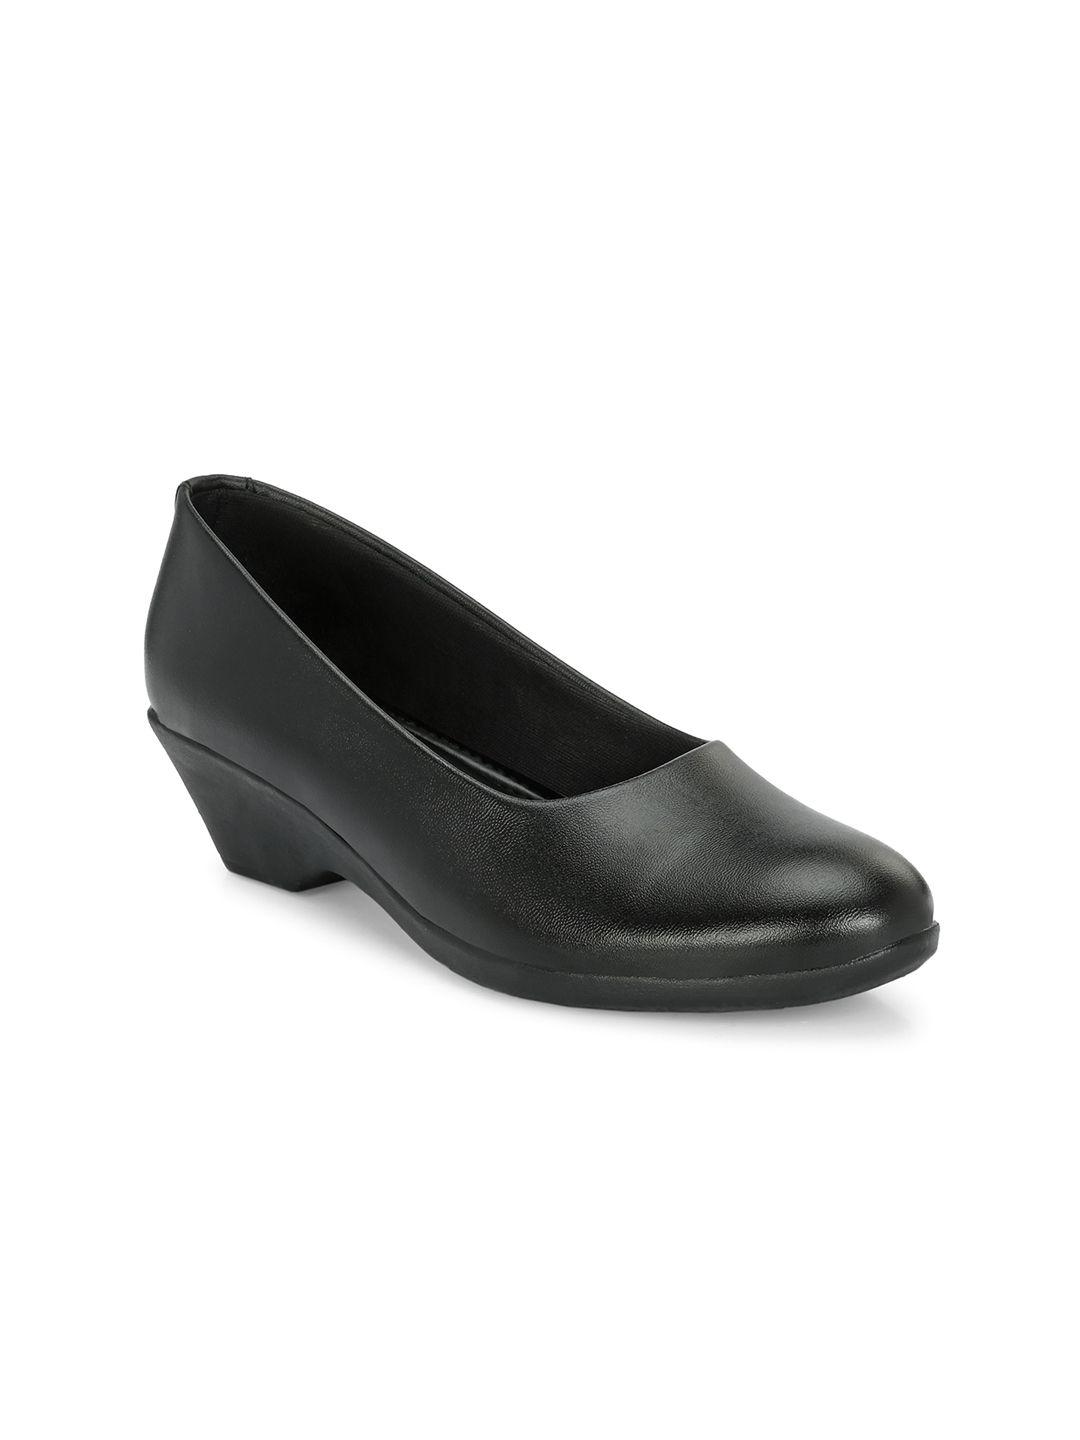 eego italy round toe work wedge pumps